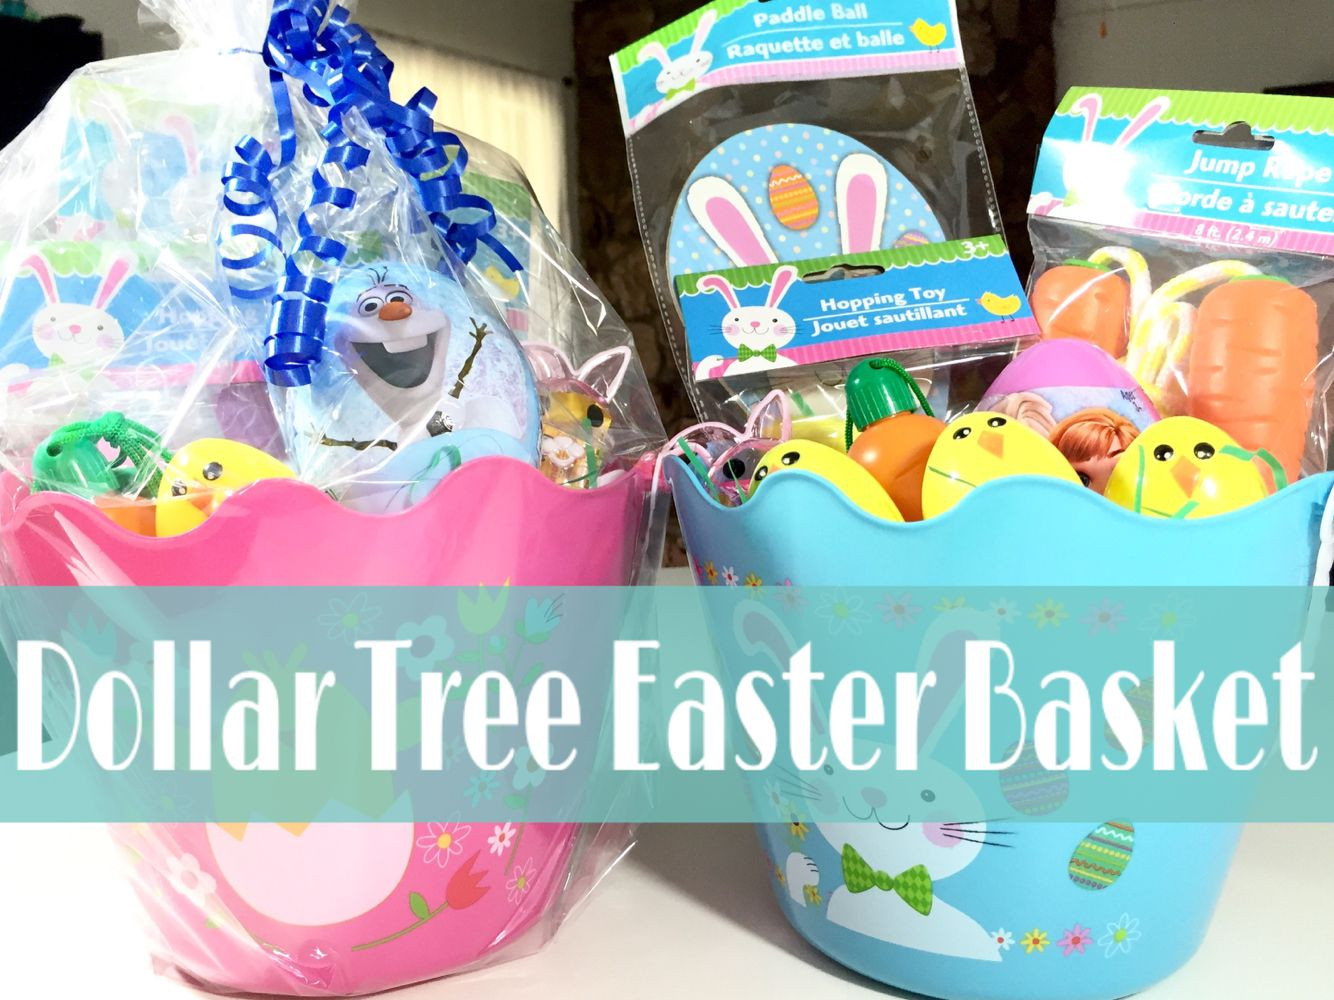 Dollar Tree Easter Basket Ideas
 I created these Easter baskets with Everything from the